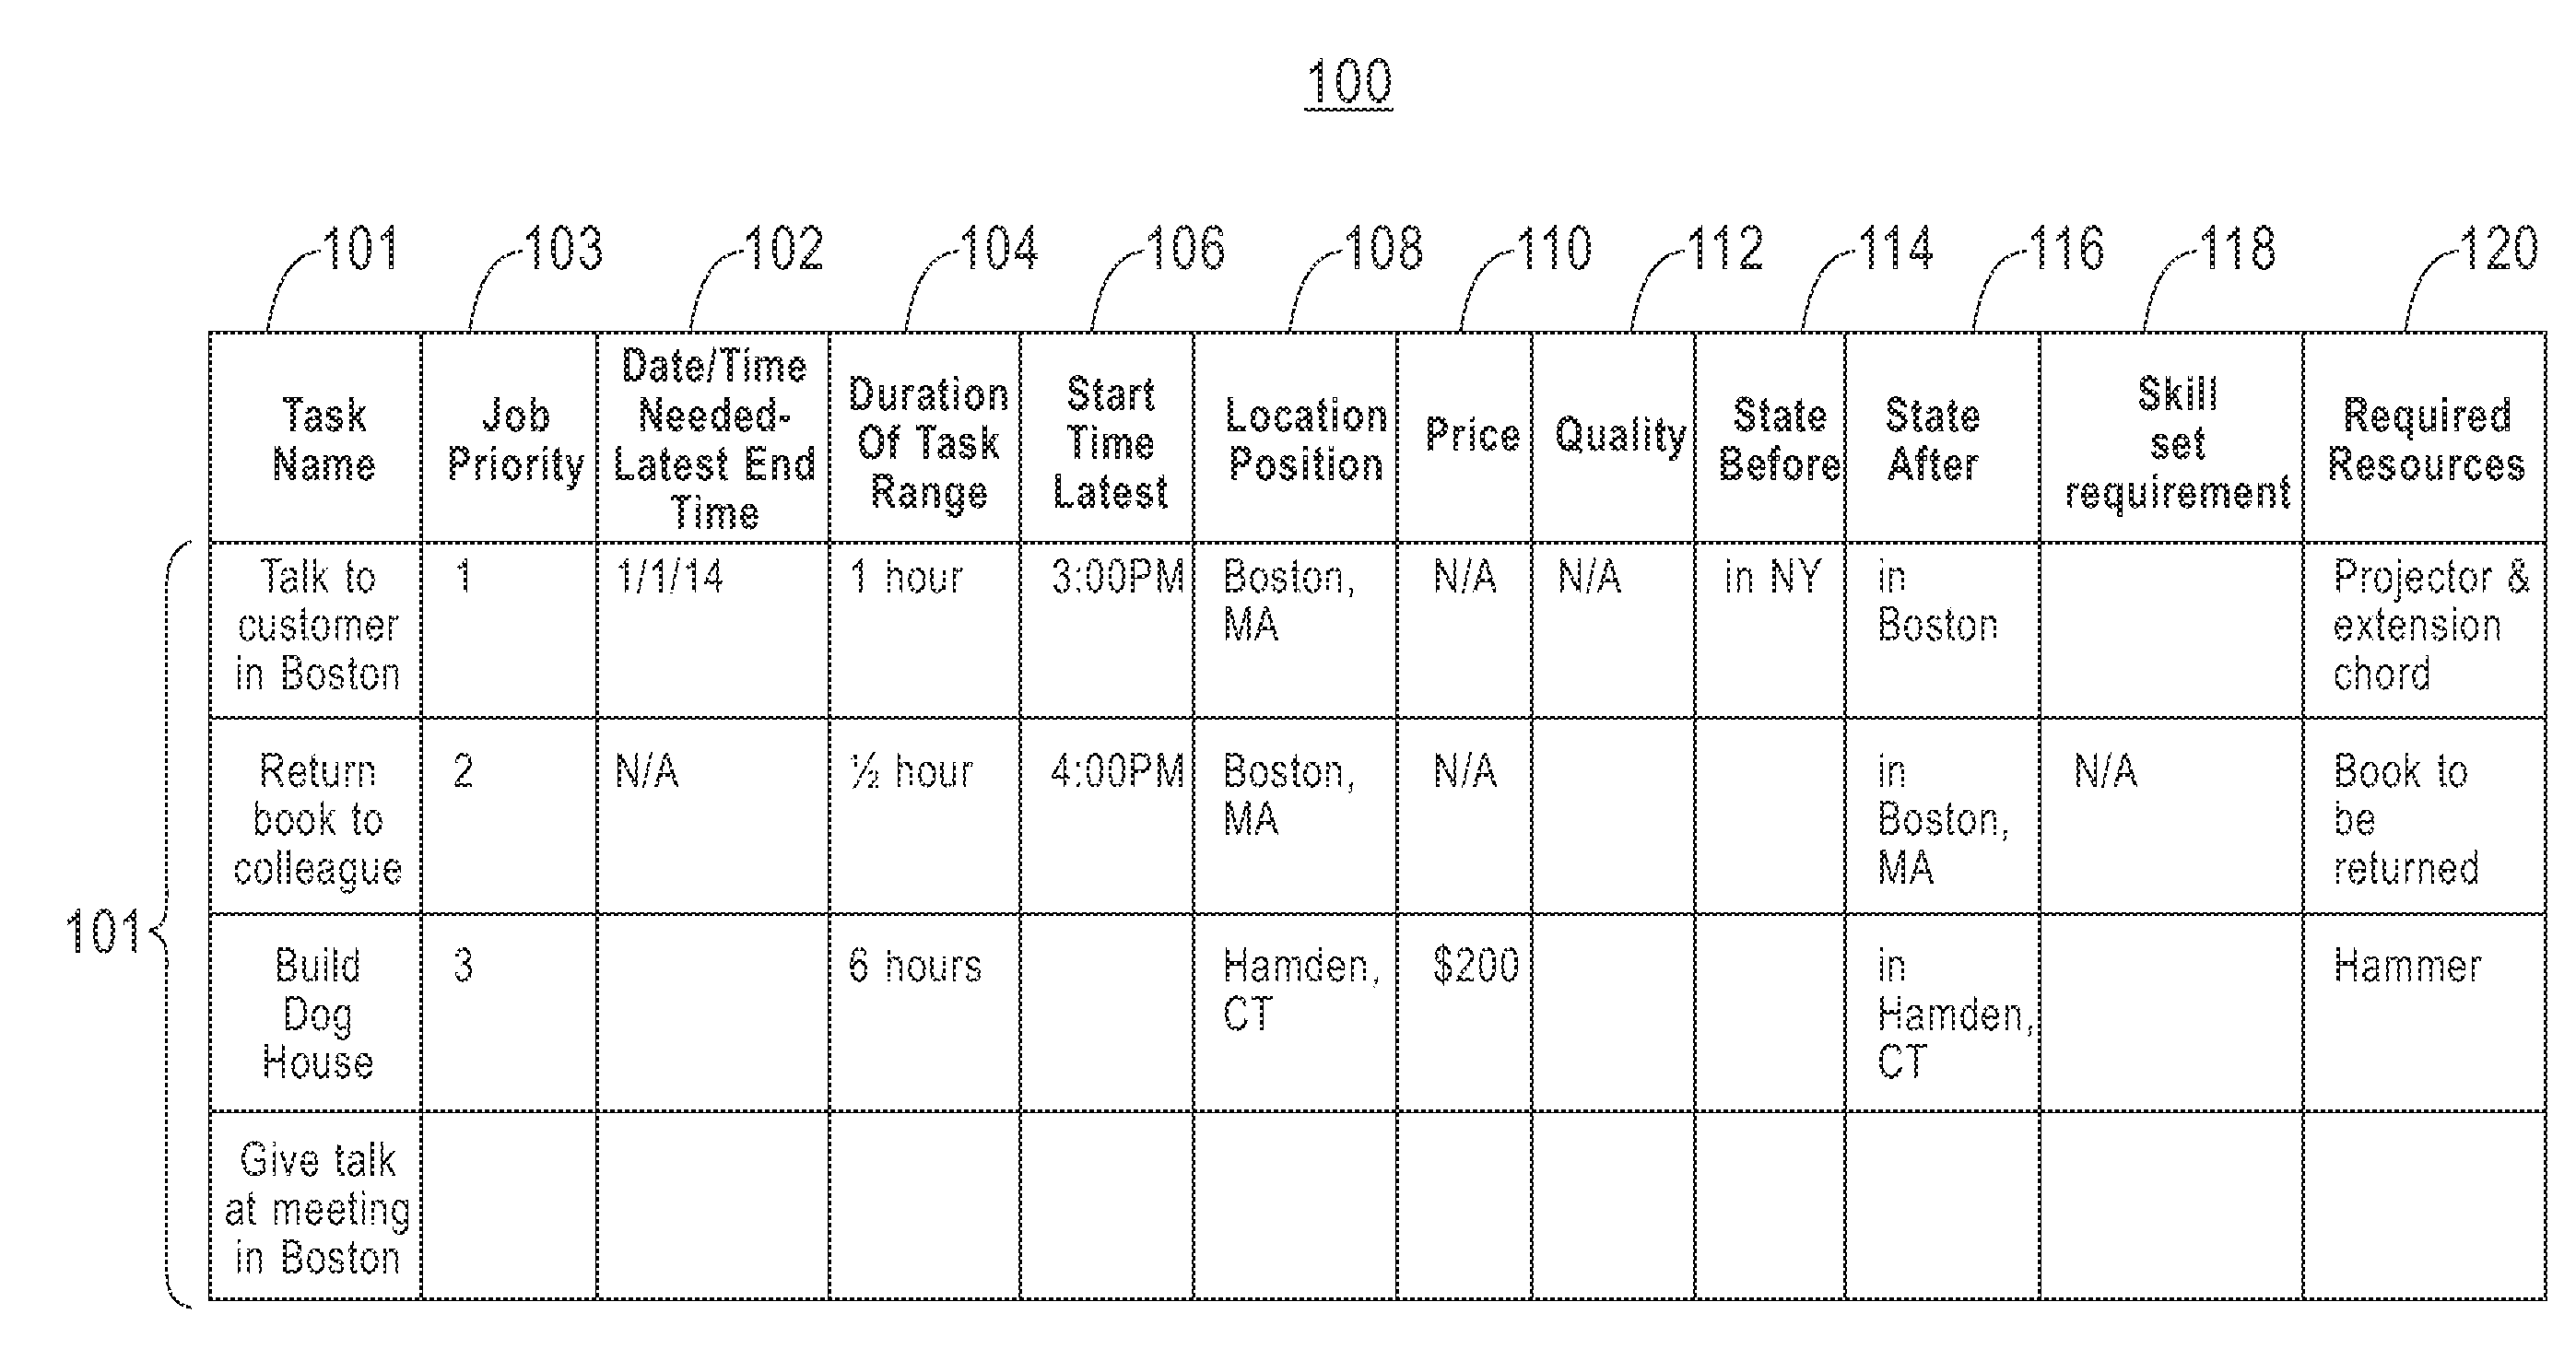 Dynamic location-aware coordination method and system